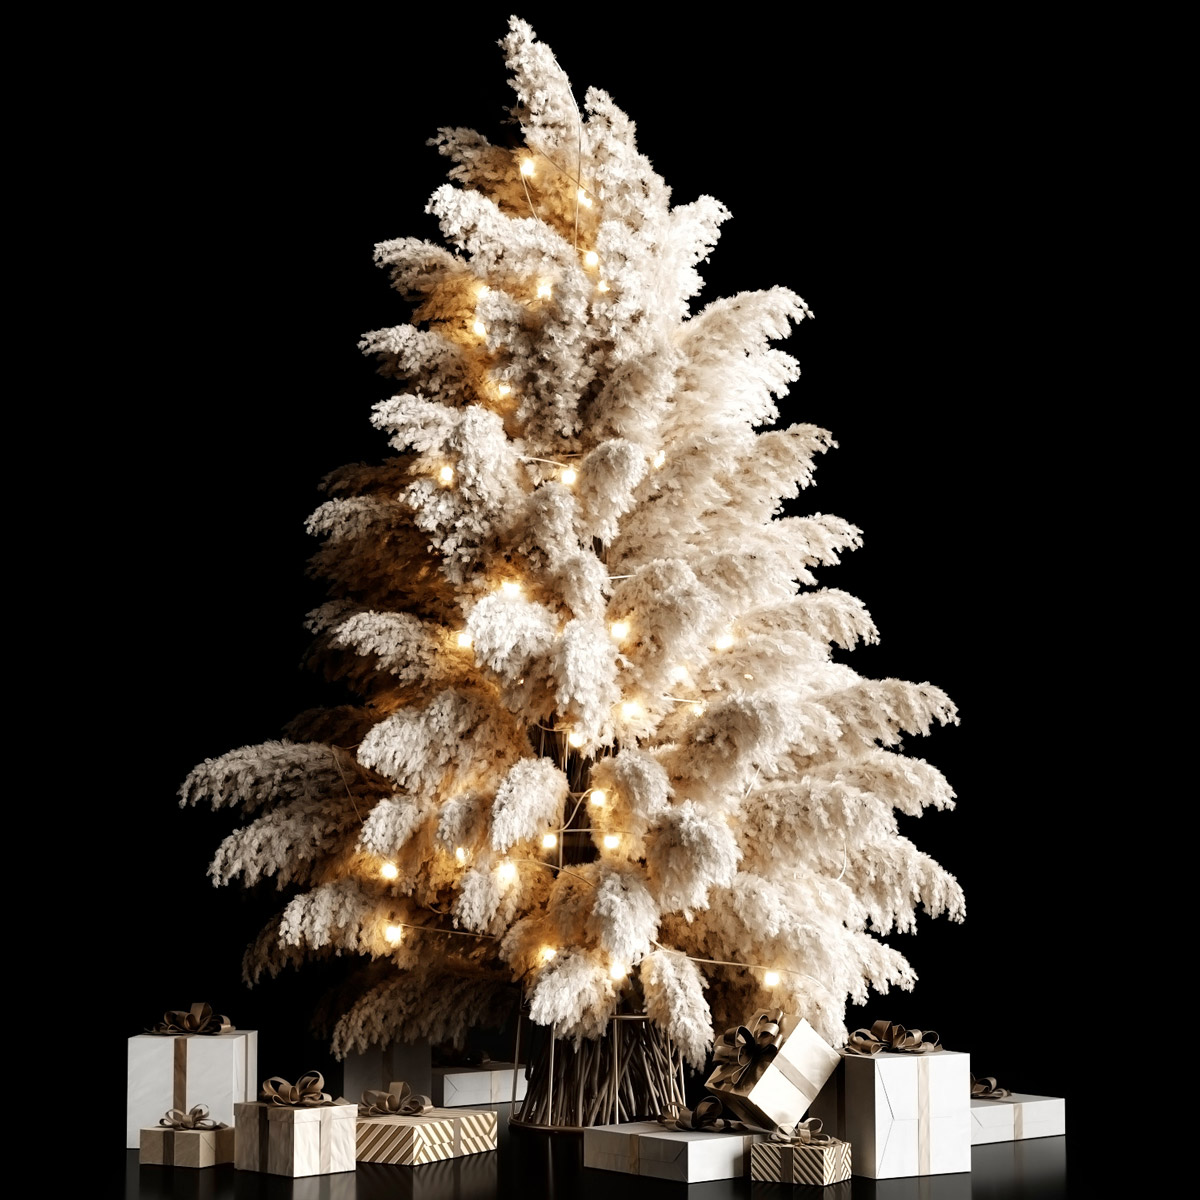 A 3D Christmas tree by Aviato3D, one of our favorite 3D models.